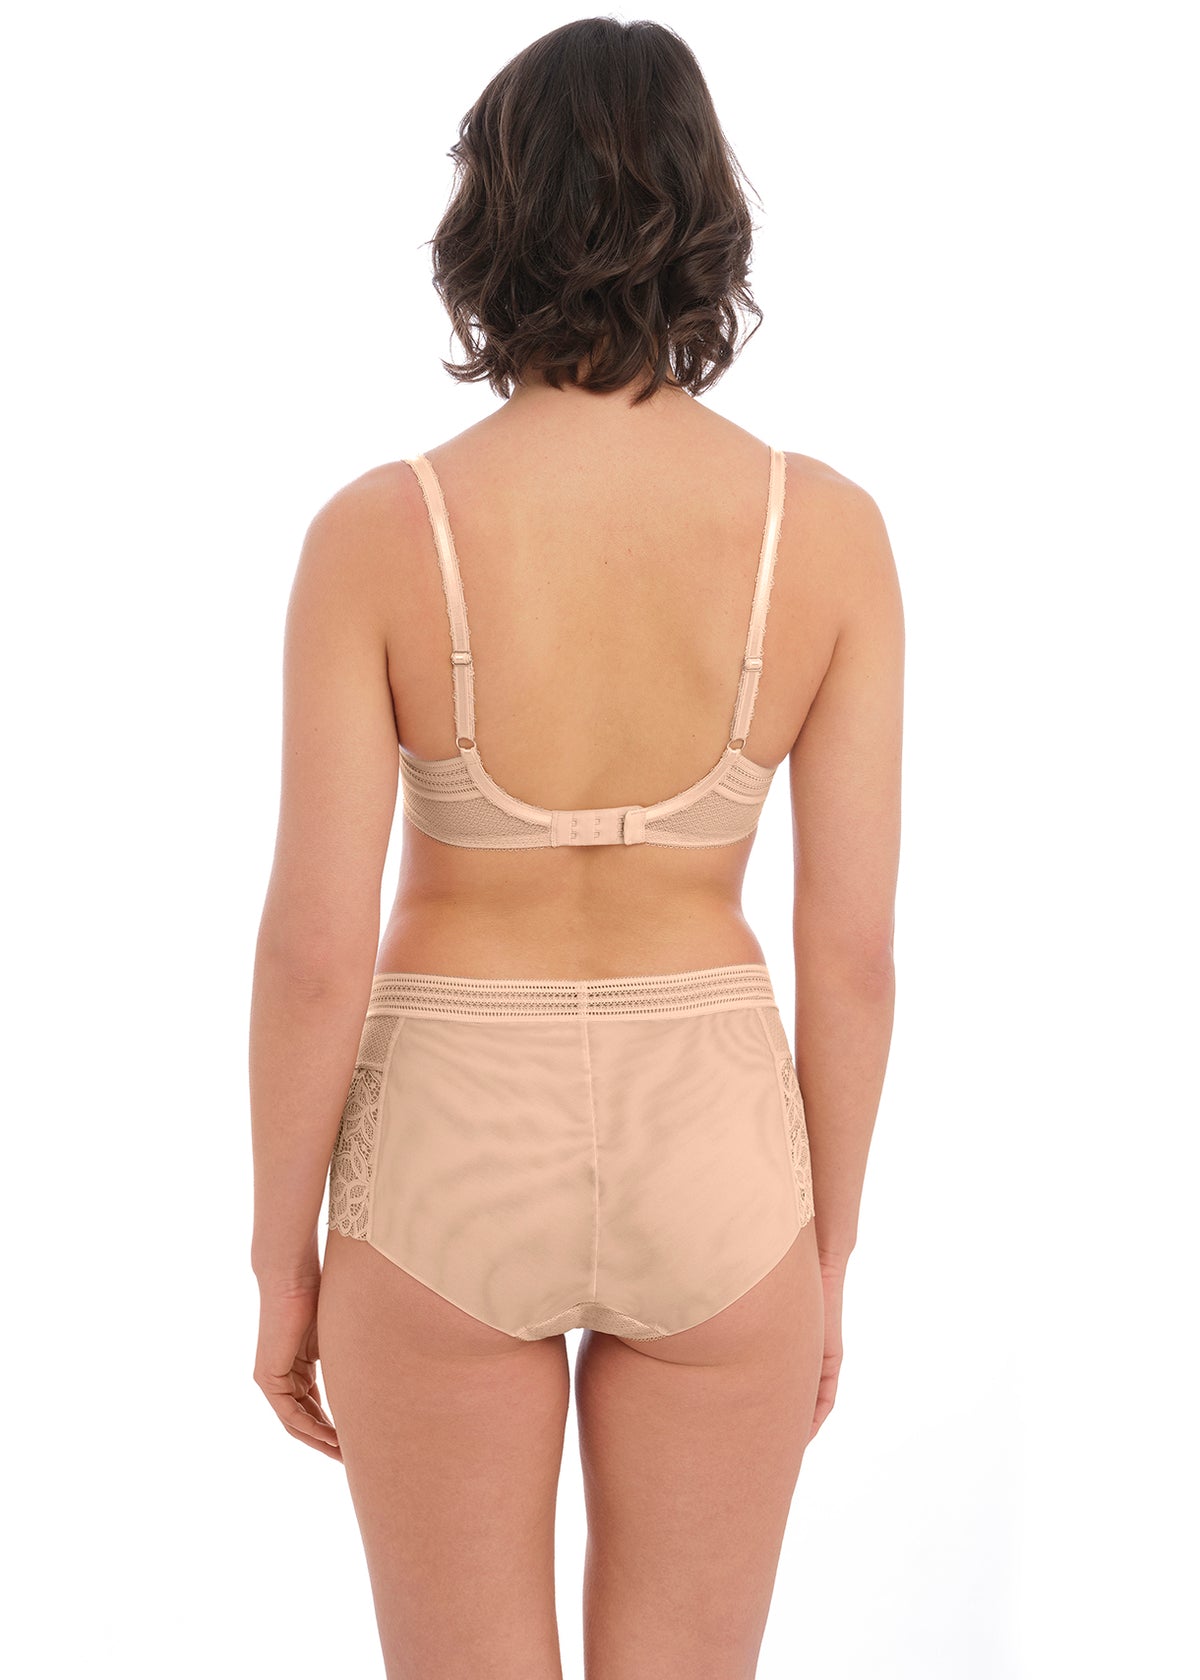 Pretty Things Wacoal Raffine Non-Padded Lace Nude Bra - Underwear Specialists